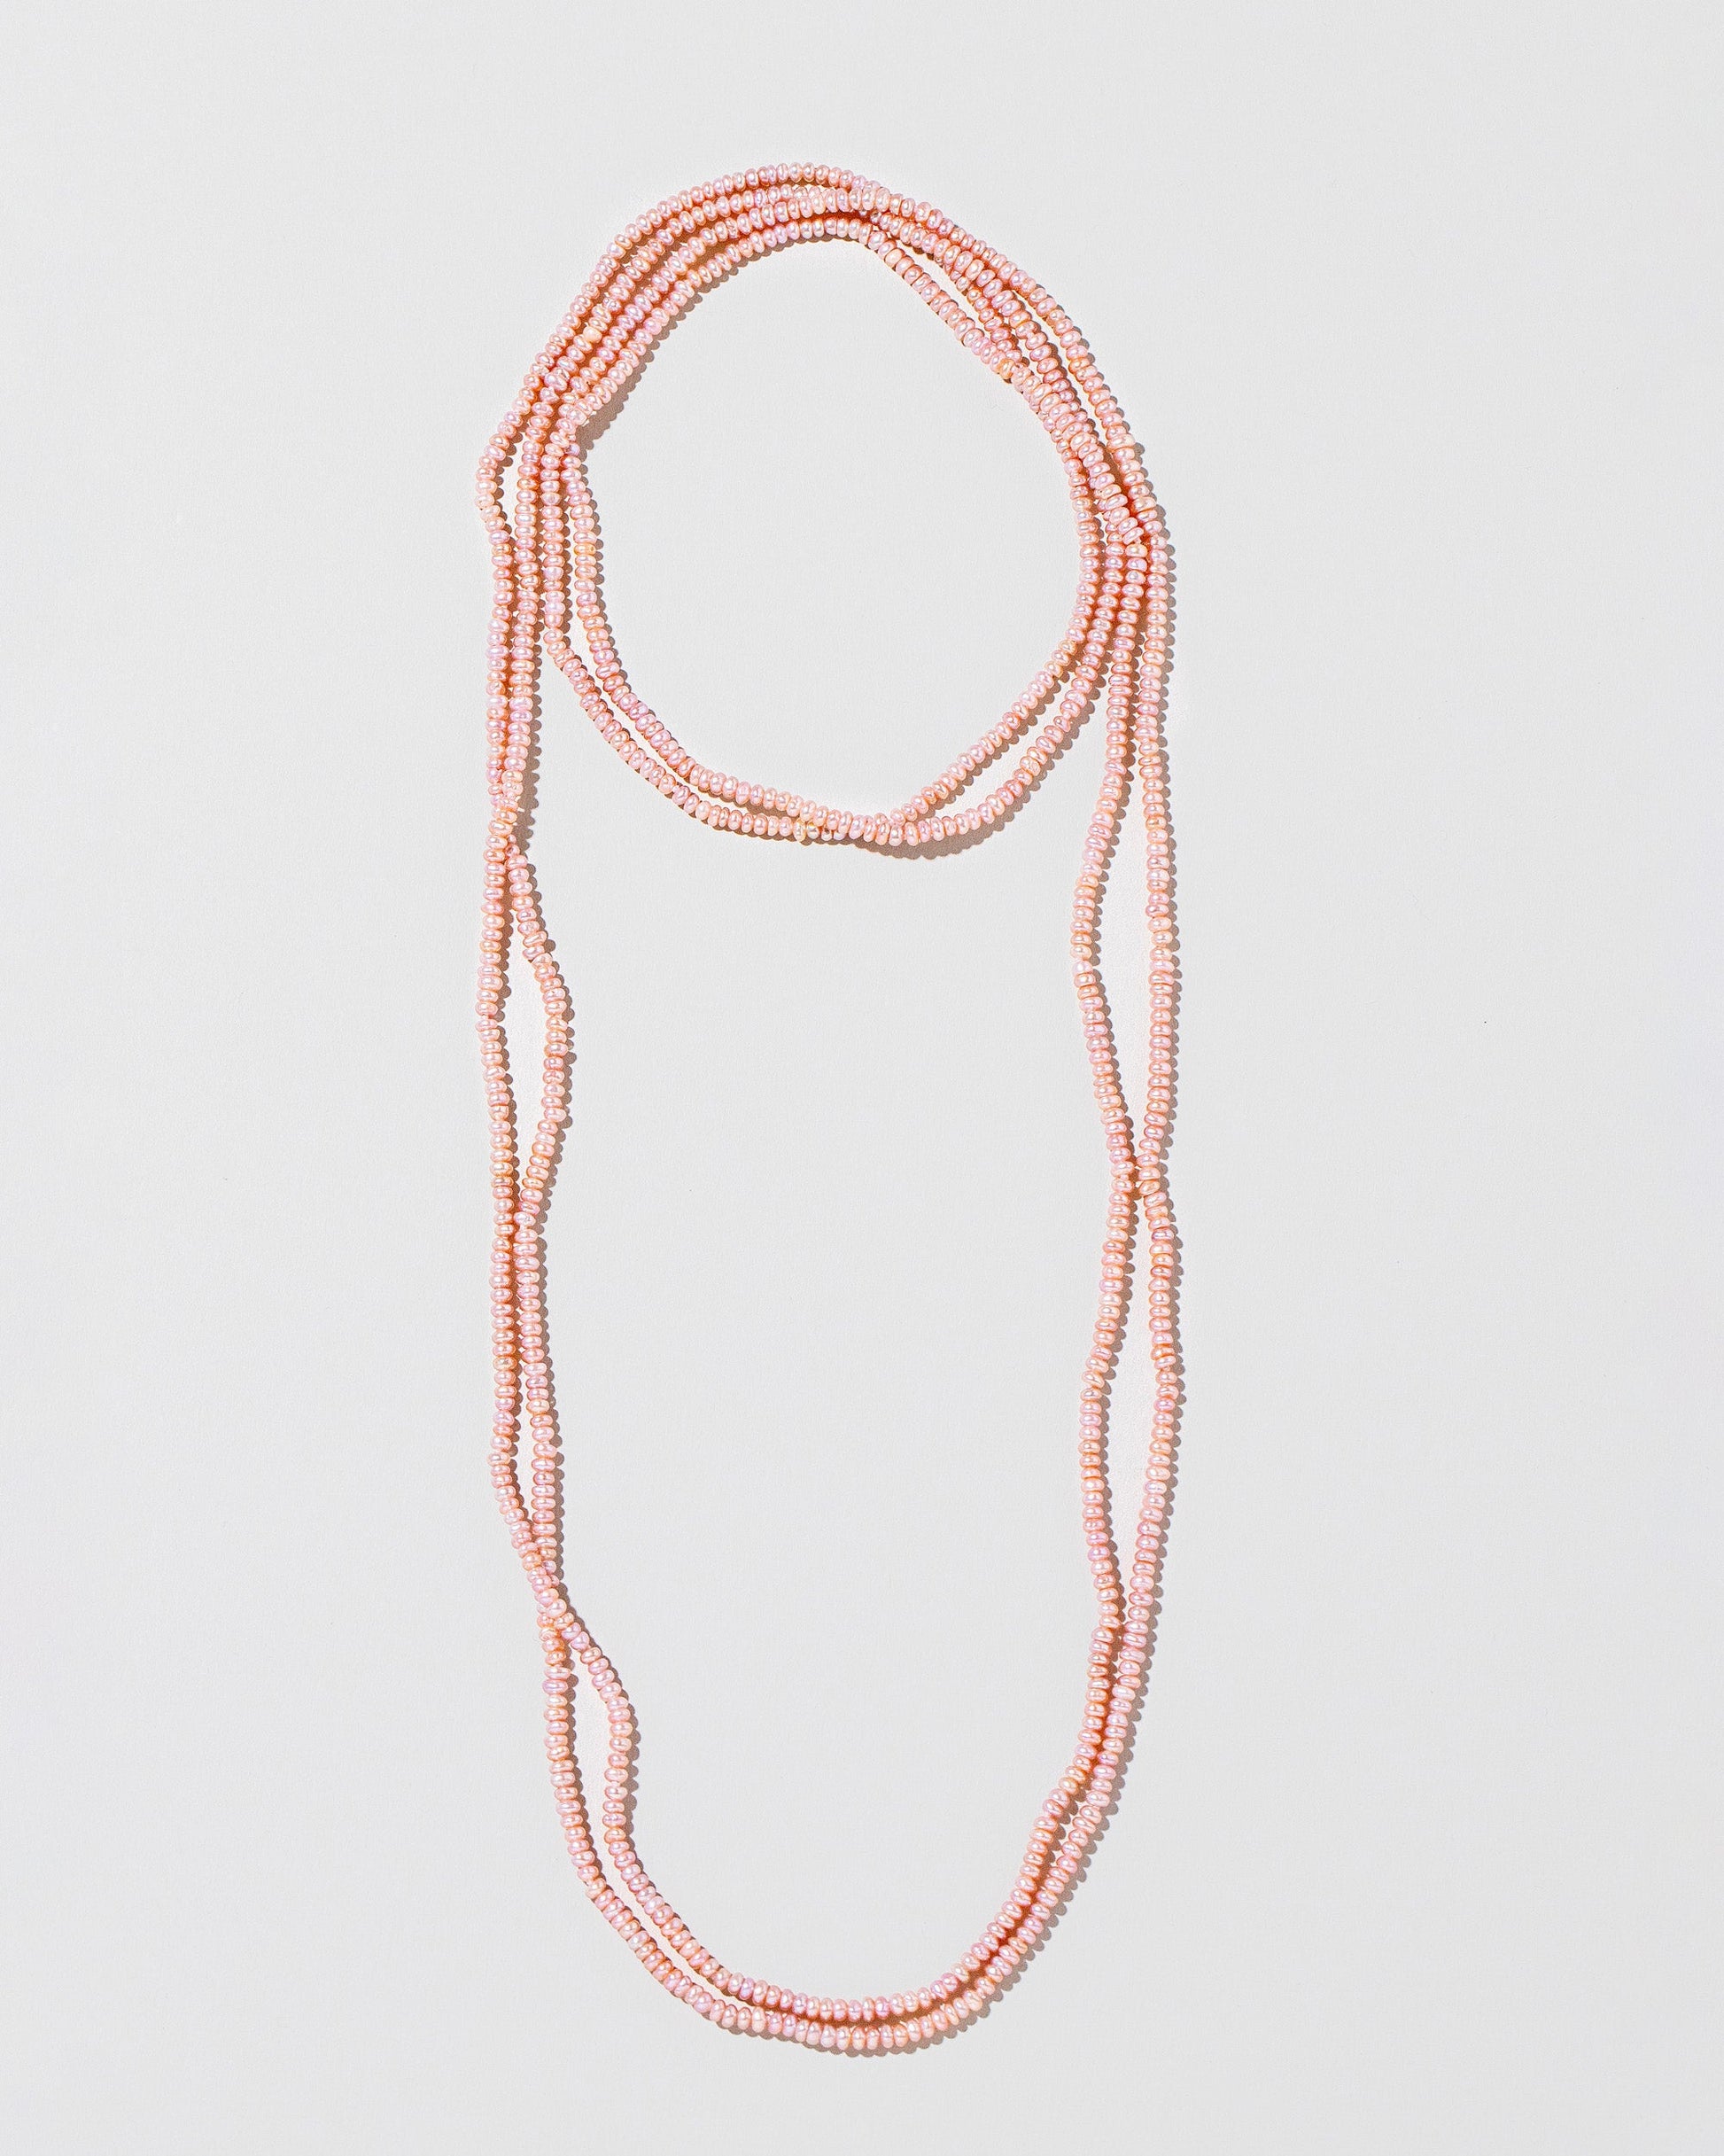  Seed Pearl Rope Necklace on light color background.